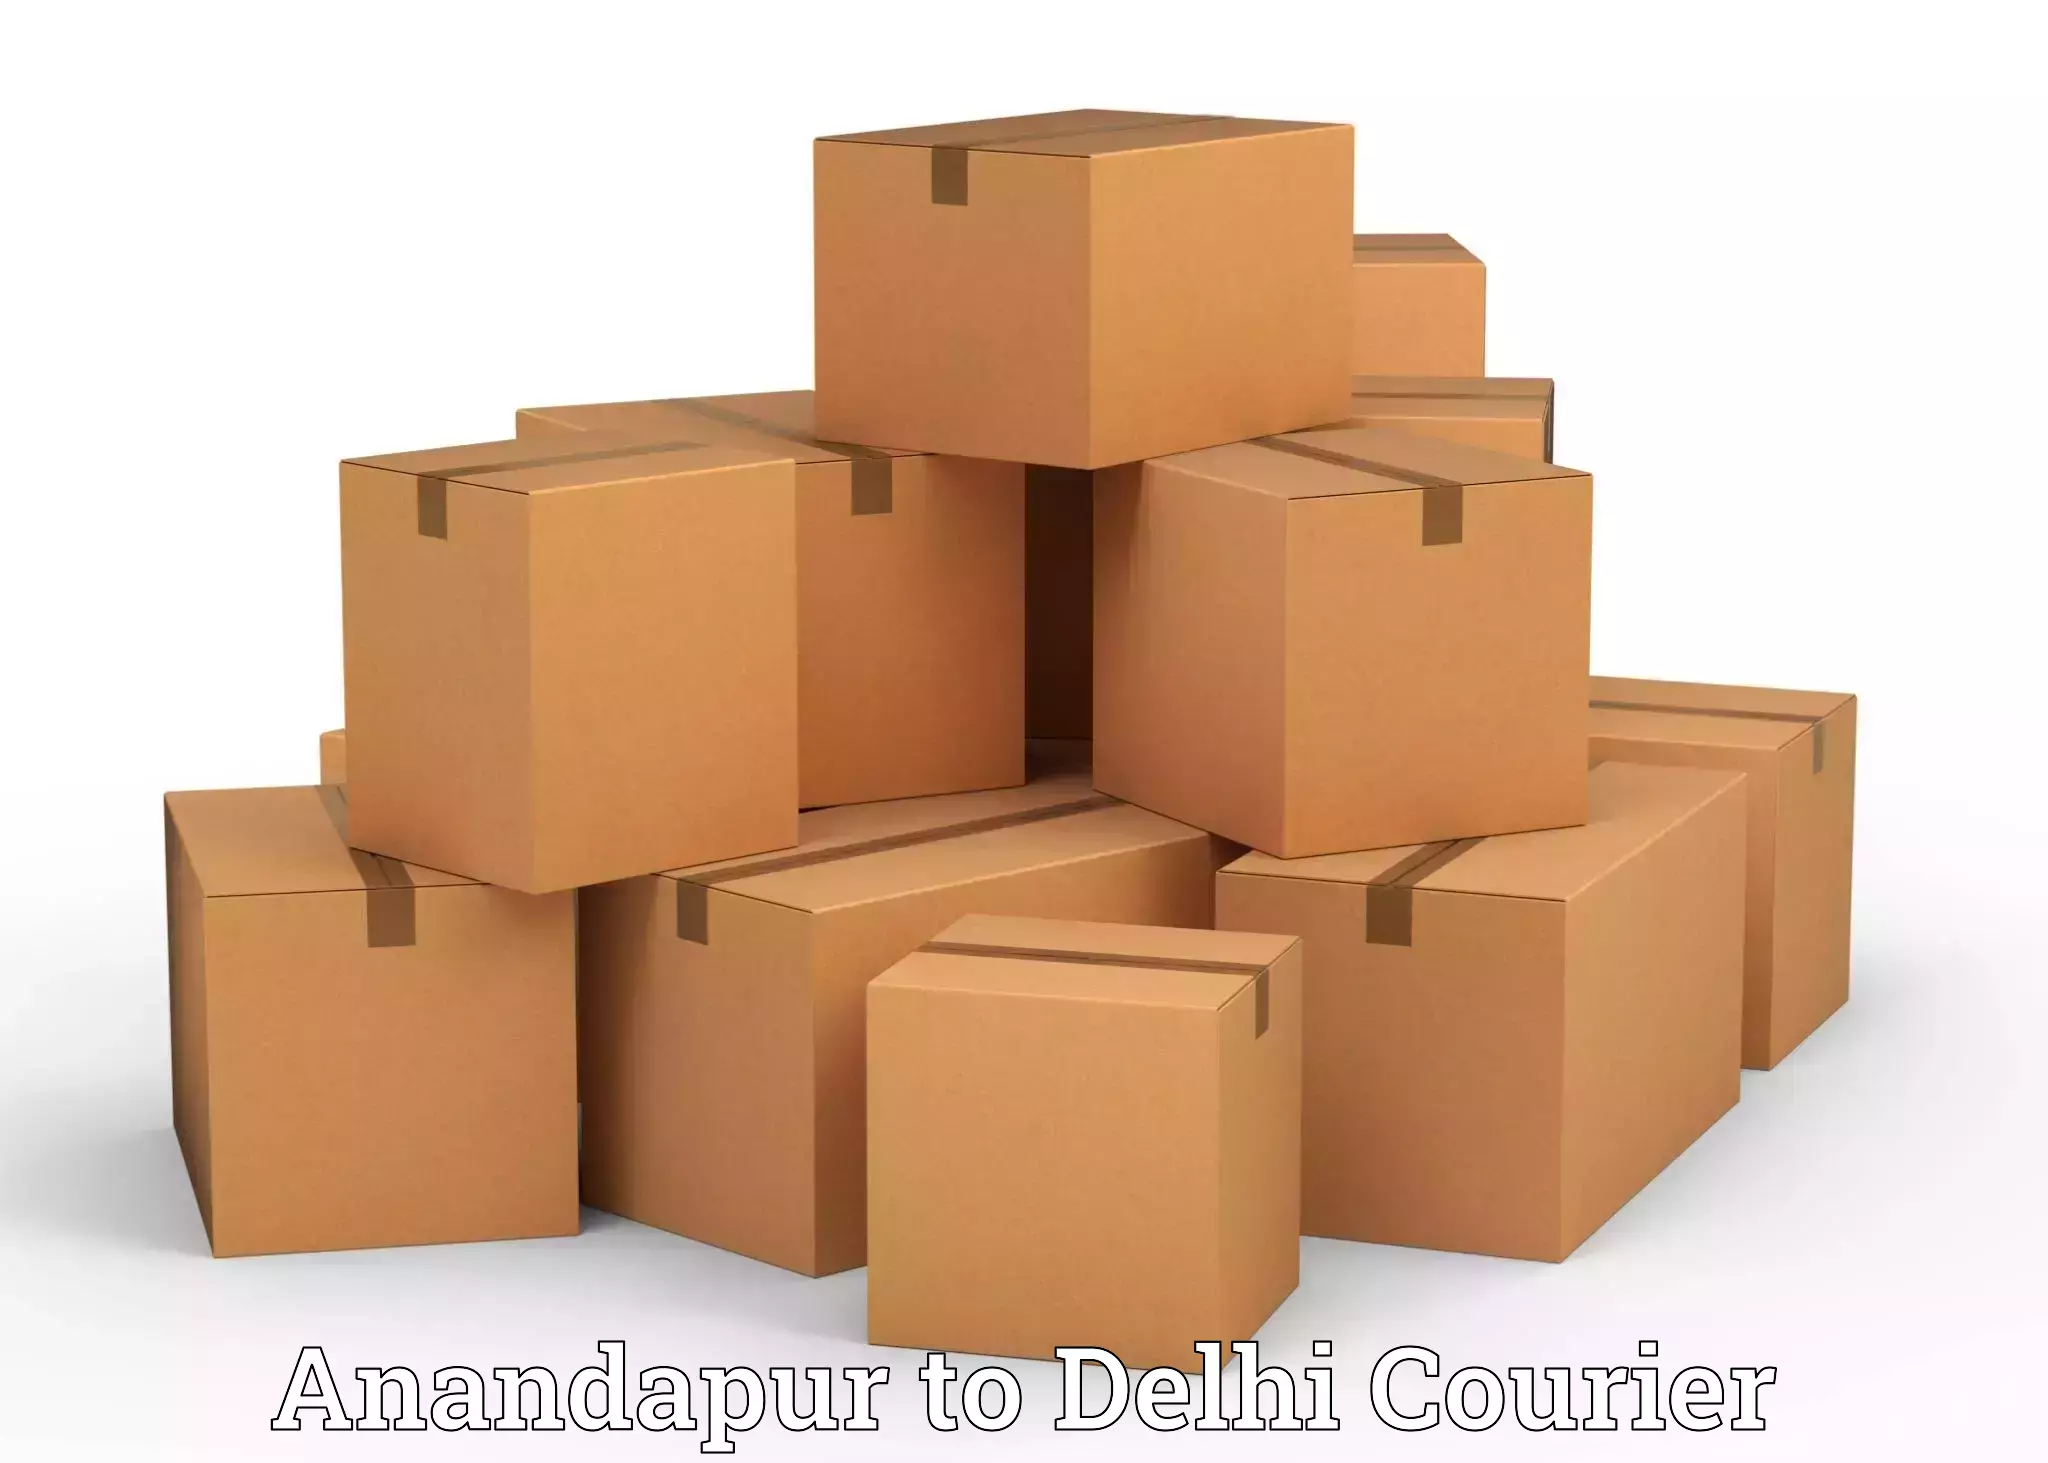 Efficient relocation services Anandapur to NCR